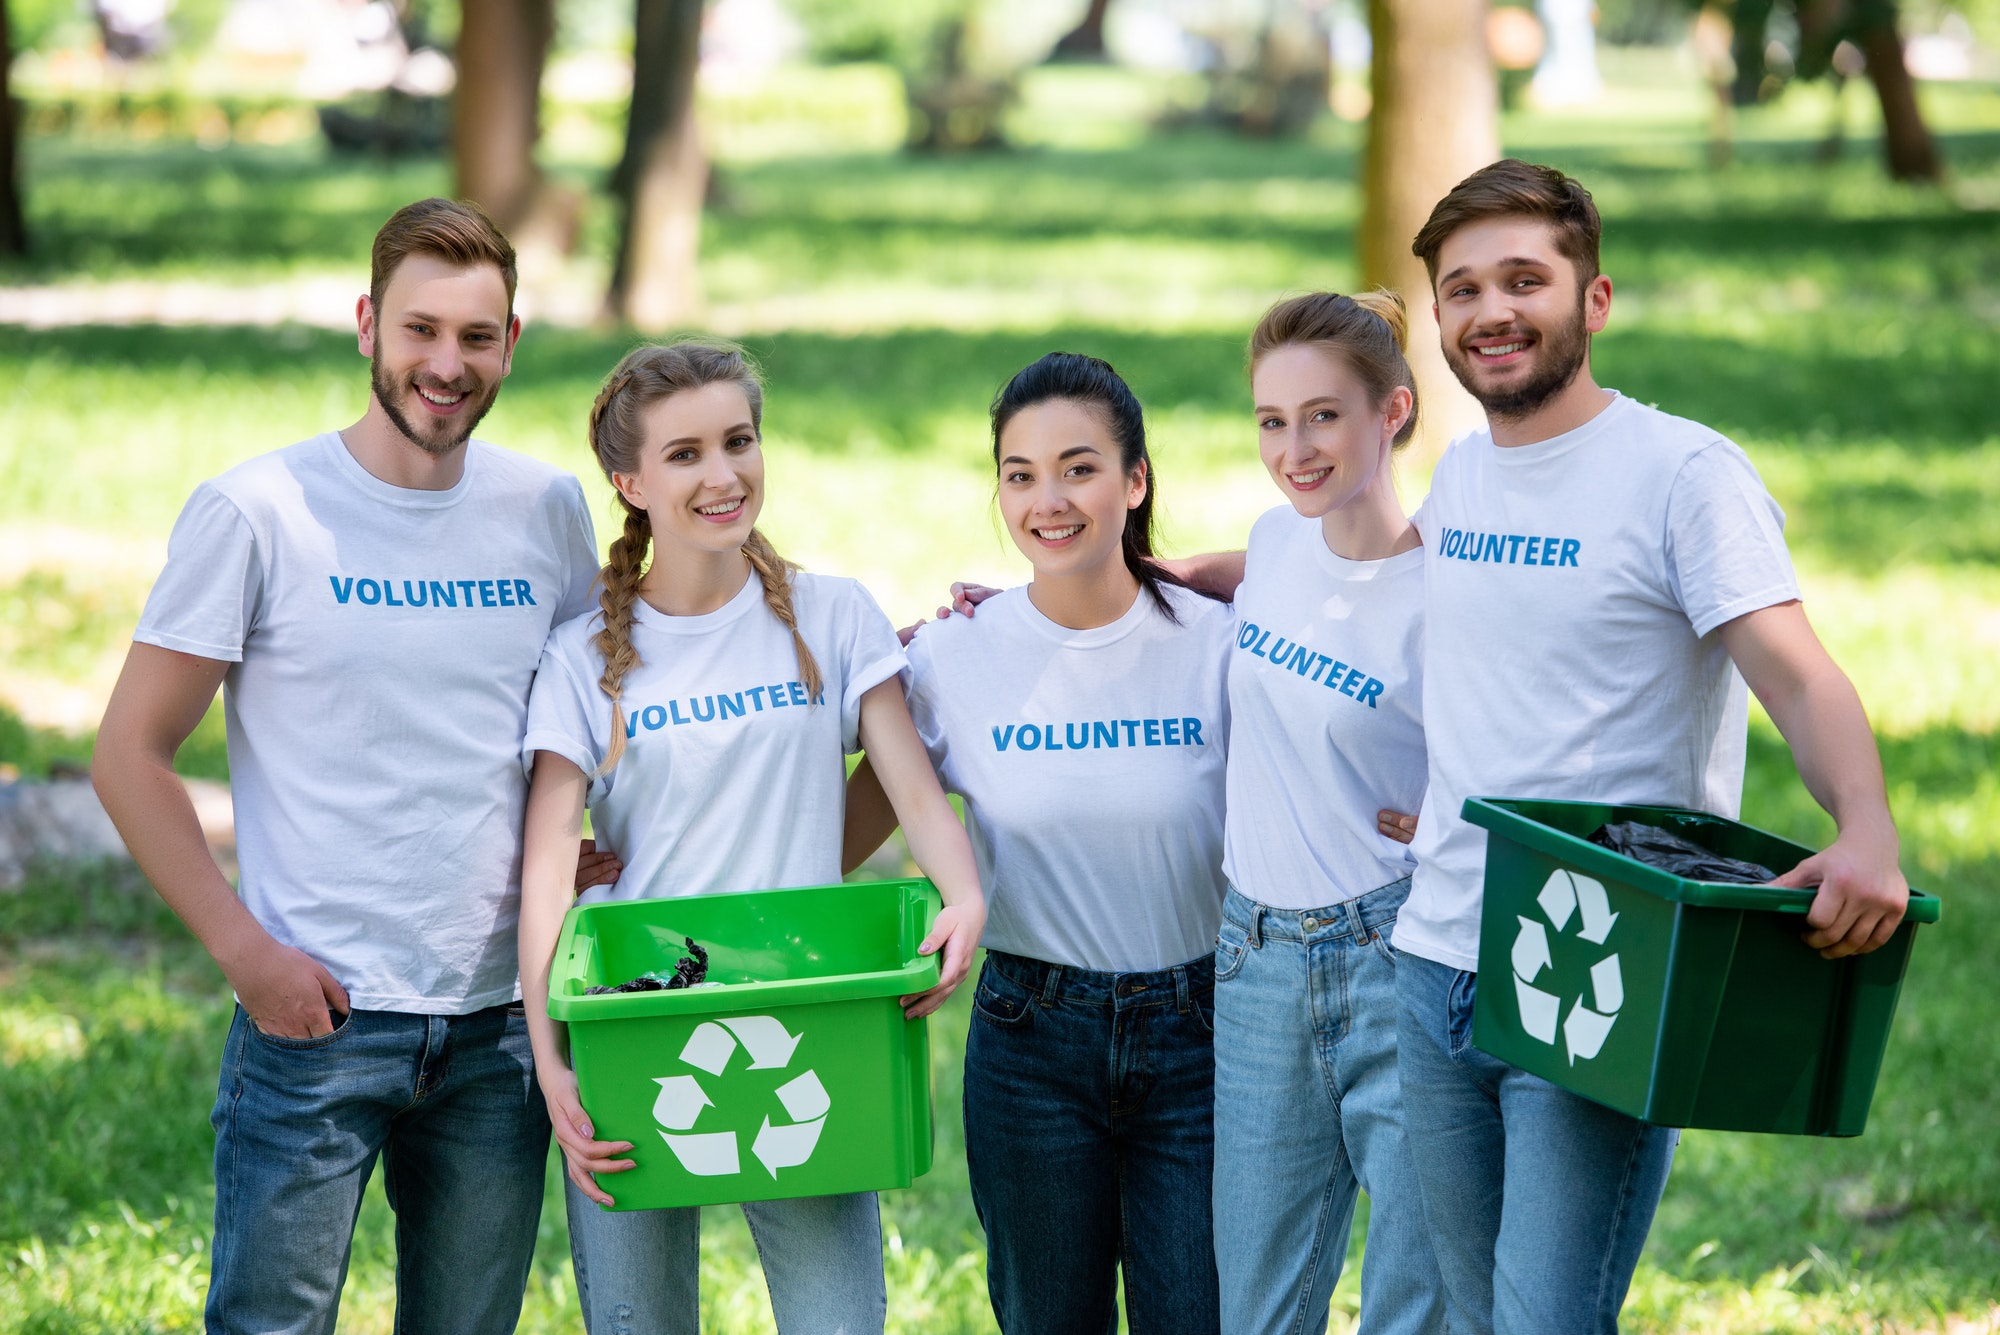 young-volunteers-with-green-recycling-boxes-for-trash-standing-in-park.jpg